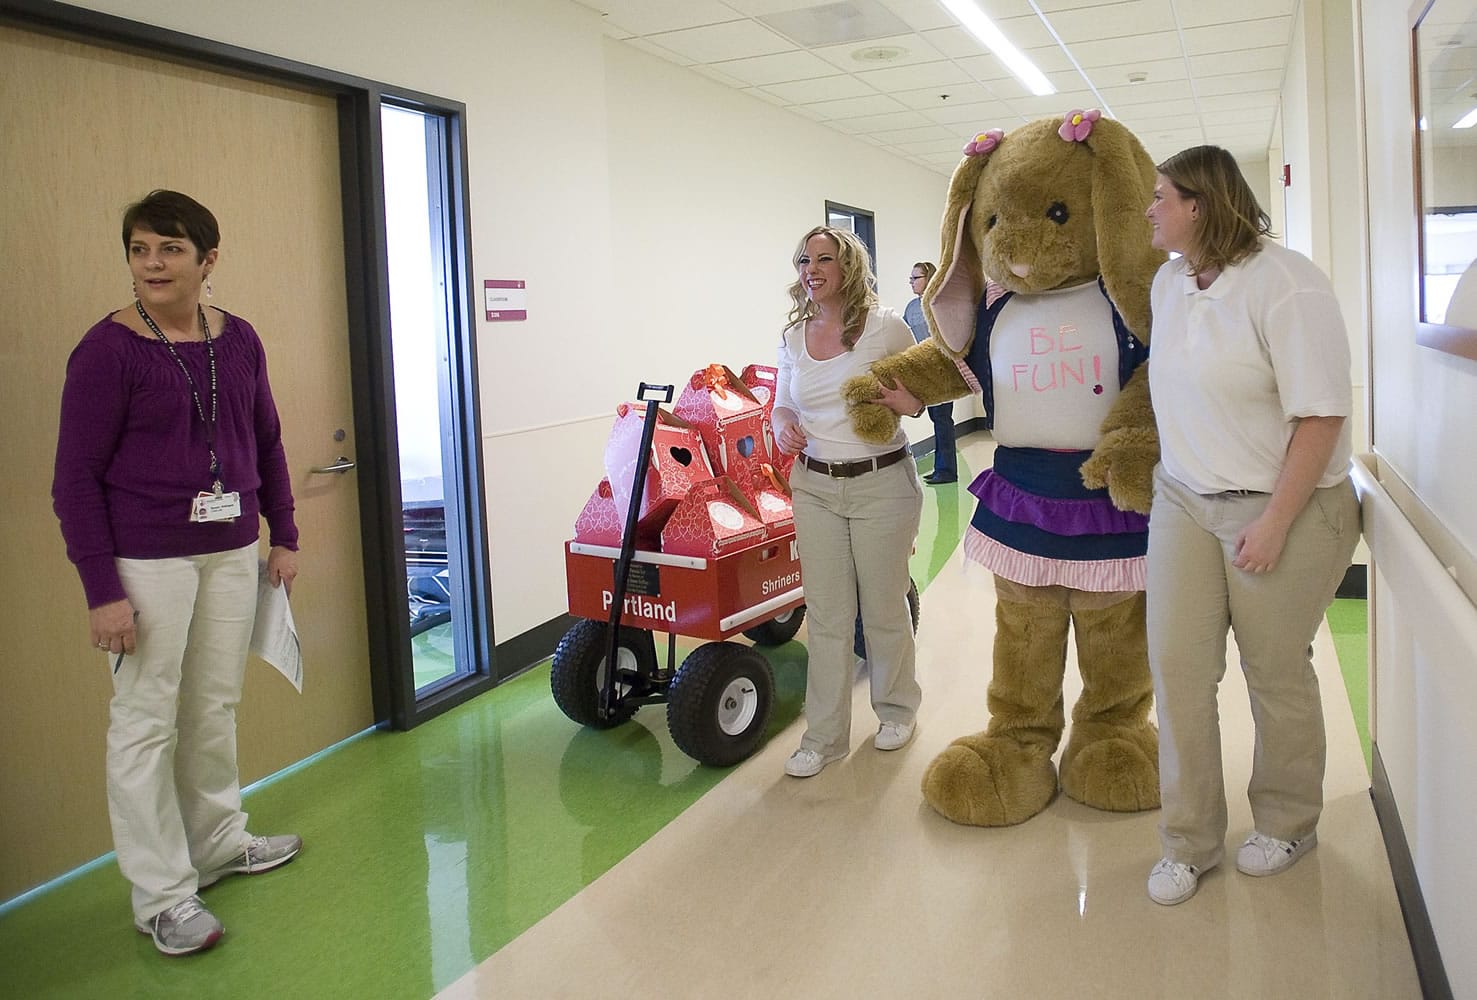 Certified child life specialist Susan Gallegos, from left, looks down the hospital corridor as Build-A-Bear employees Darcy Potter and Shannon Nashis help guide Danielle Thomas, who is dressed in a bunny suit, while visiting patients.